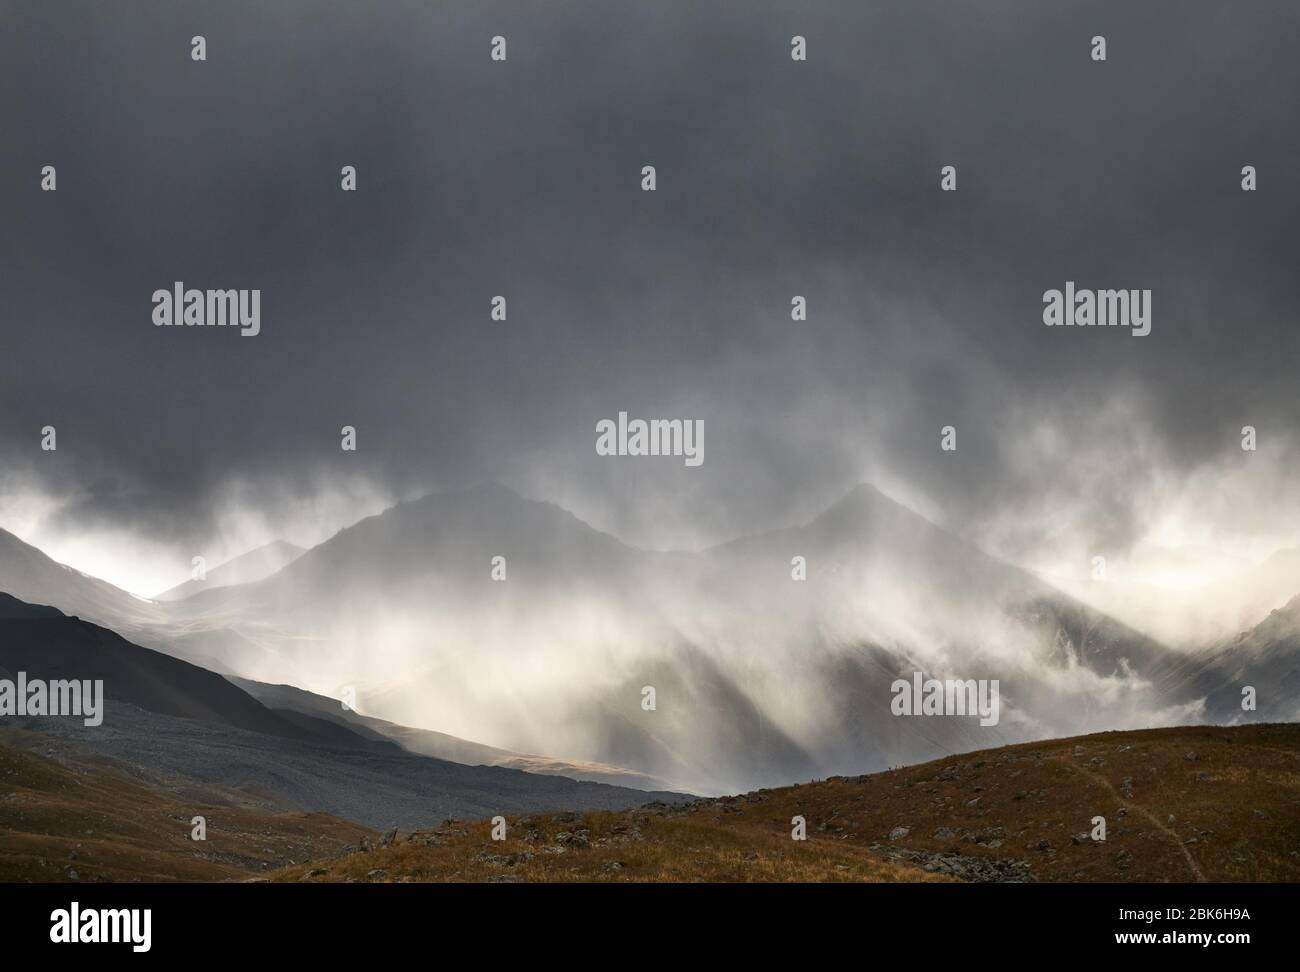 Landscape of Tian Shan Mountains at dark dramatic stormy sky at sunset in Kazakhstan Stock Photo